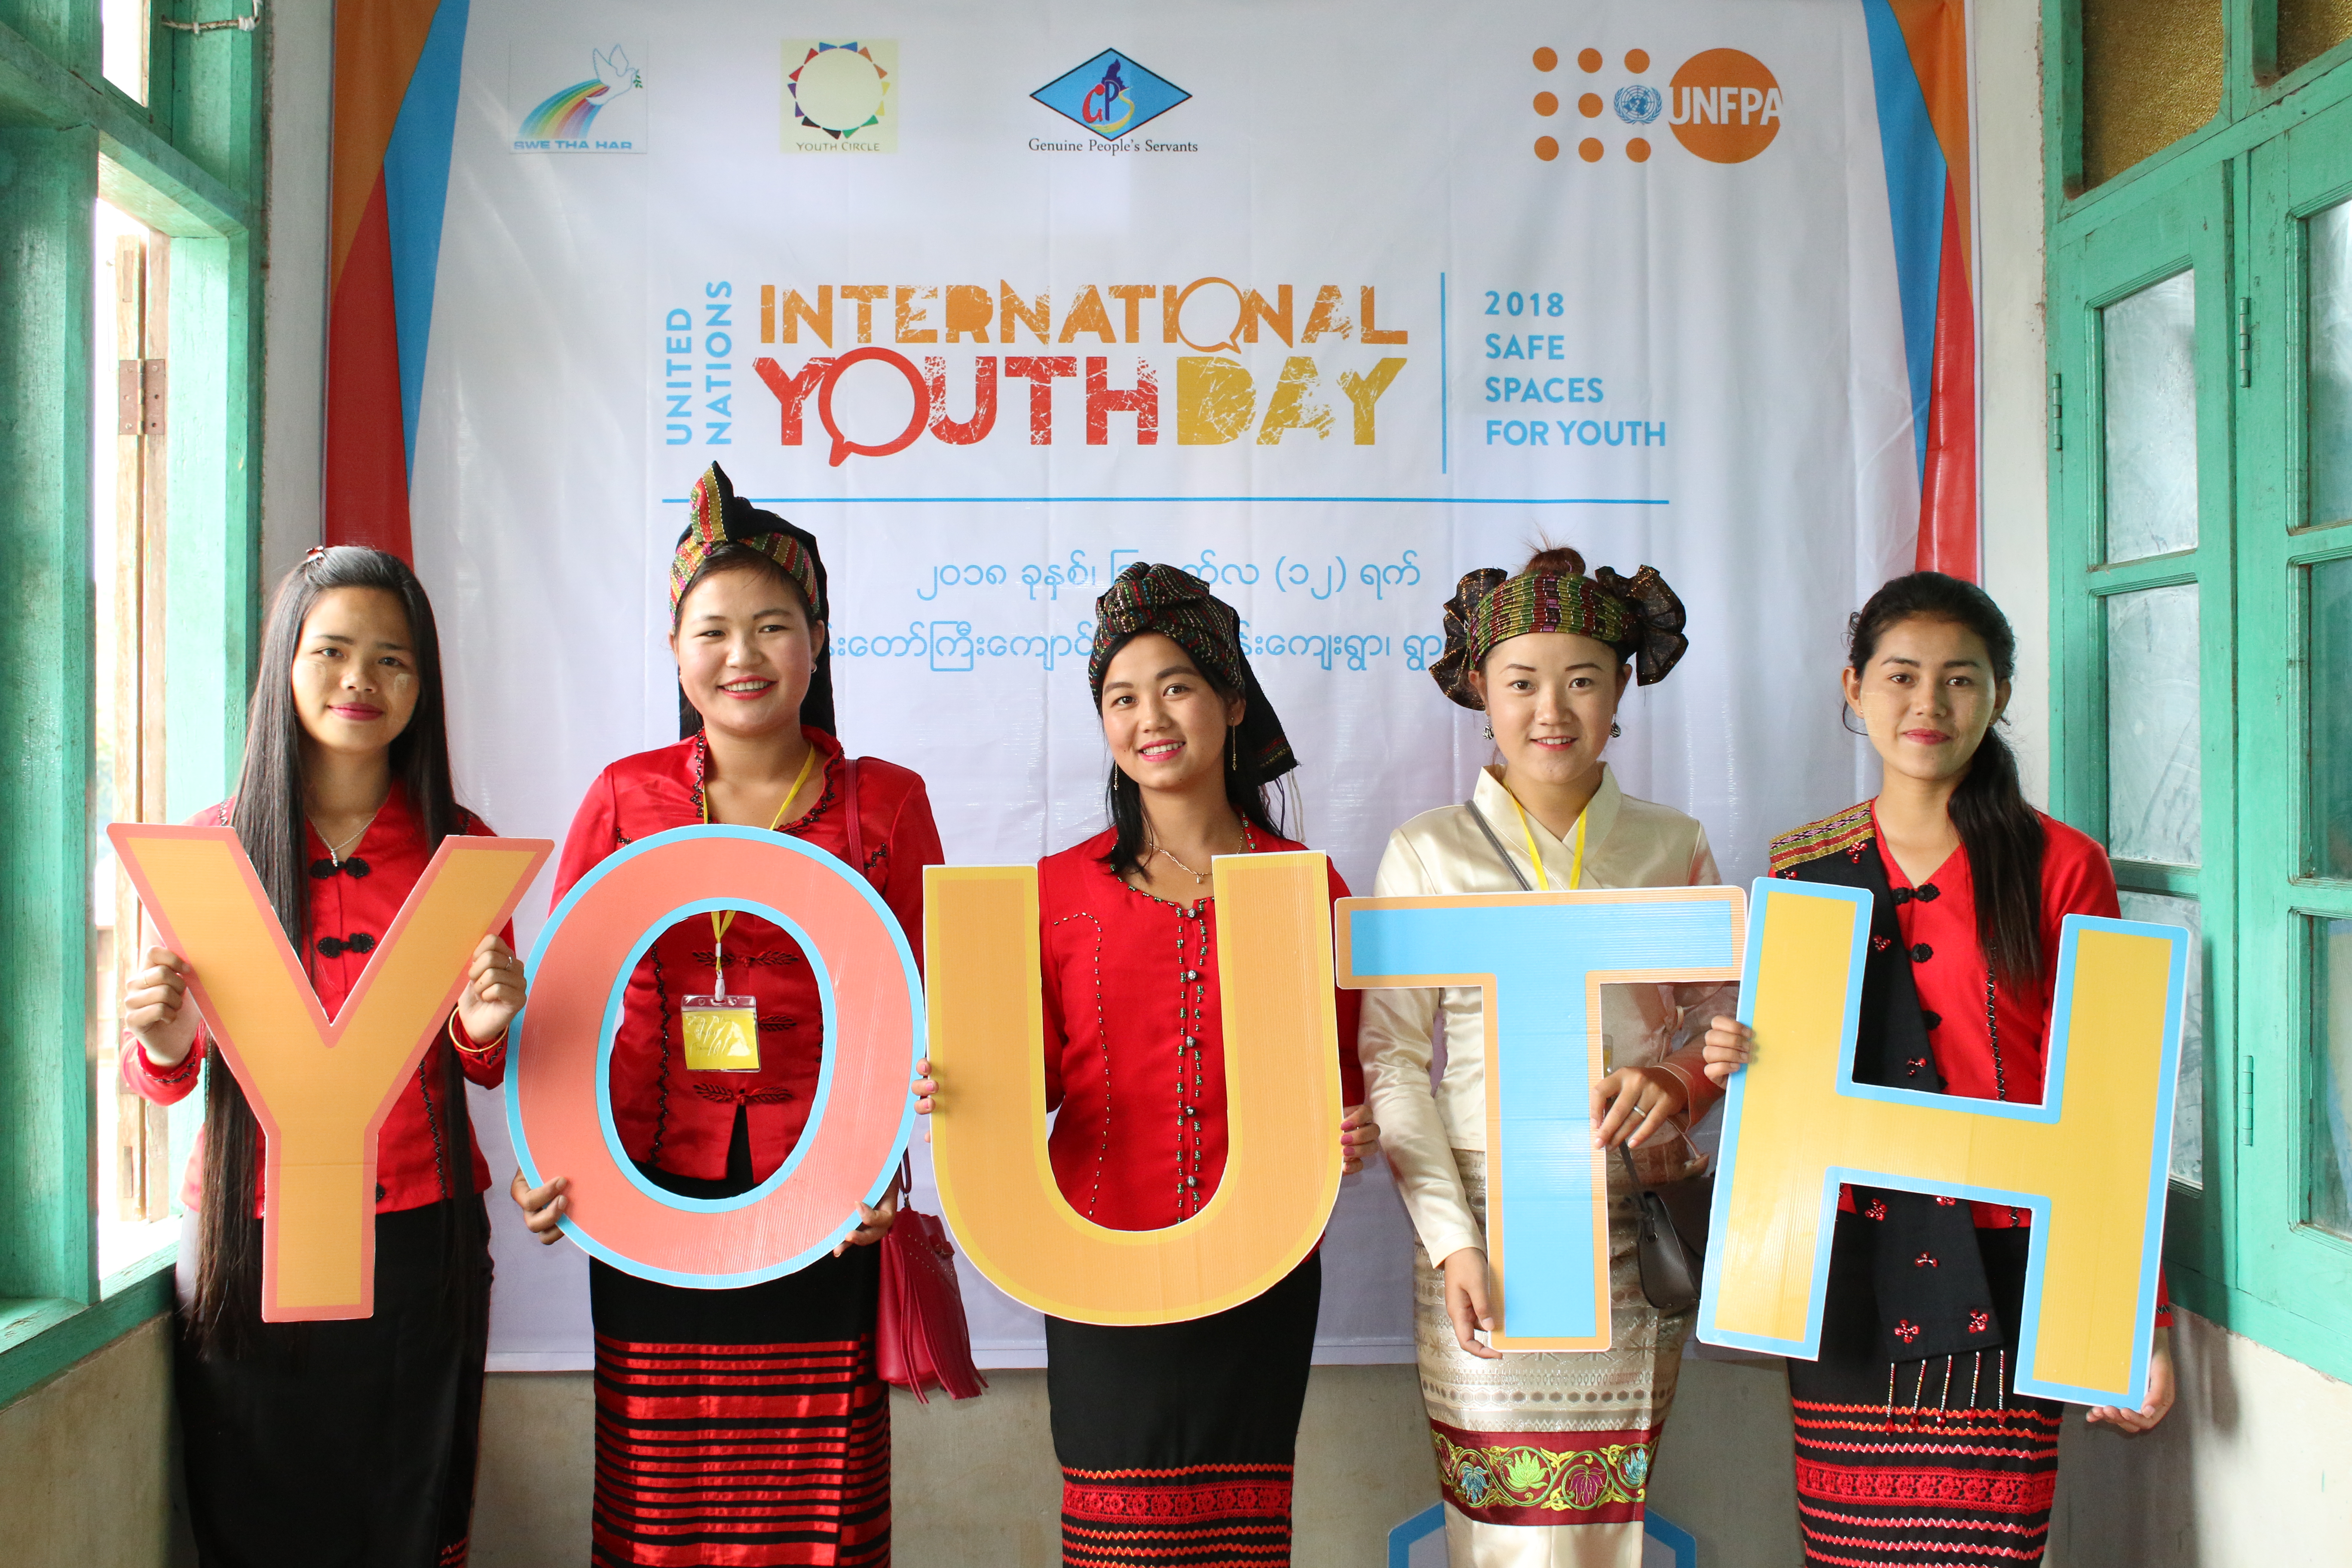 Nepal Sex Videos Teachers Day - UNFPA Asiapacific | Adolescents & youth